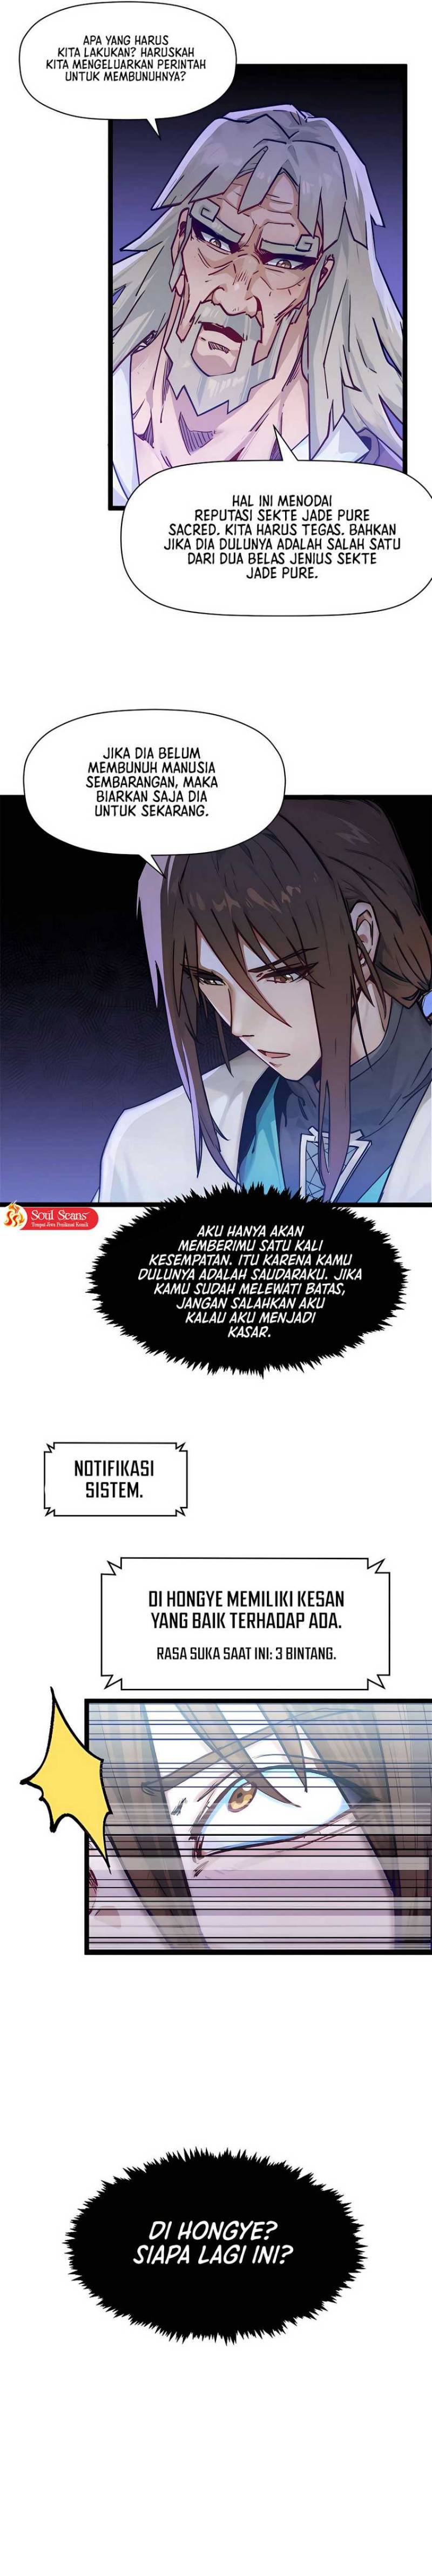 Dilarang COPAS - situs resmi www.mangacanblog.com - Komik top tier providence secretly cultivate for a thousand years 151 - chapter 151 152 Indonesia top tier providence secretly cultivate for a thousand years 151 - chapter 151 Terbaru 11|Baca Manga Komik Indonesia|Mangacan